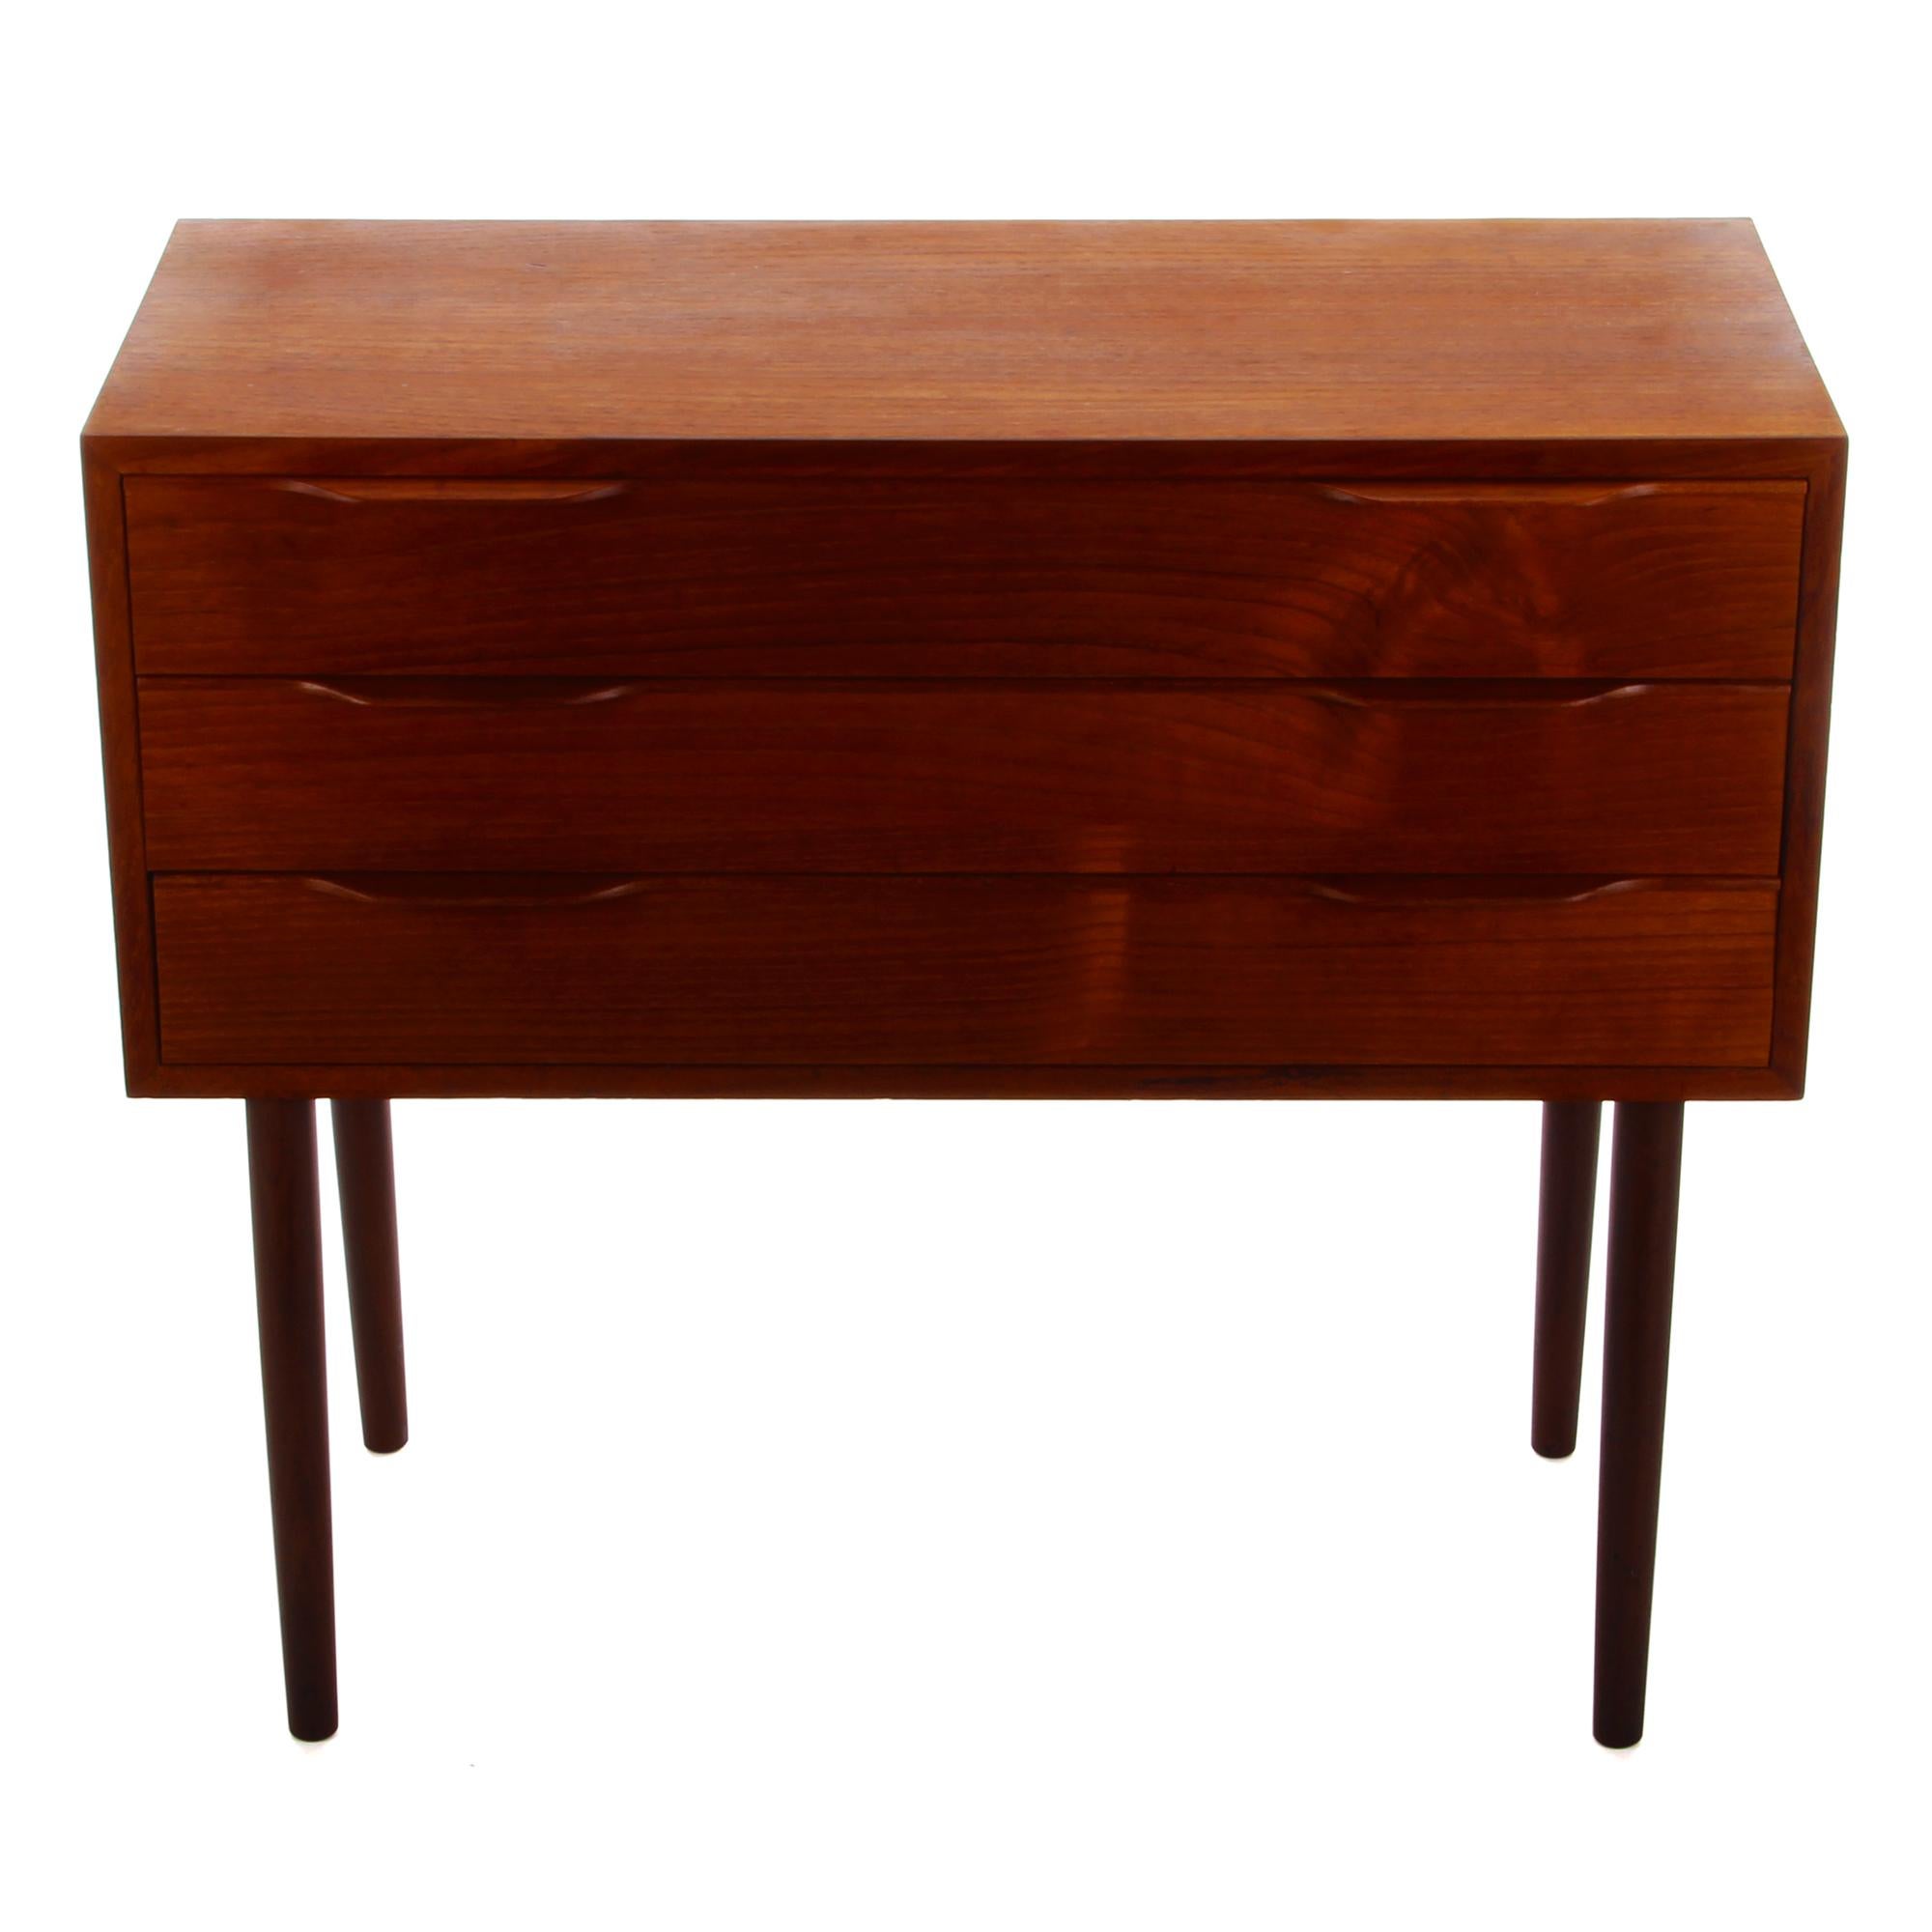 Teak chest of drawers from the 1960s - Danish vintage entry table or dresser with three drawers - in good vintage condition.

A beautiful midcentury dresser with teak veneer on all surfaces. Four long legs carry a rectangular shaped body with